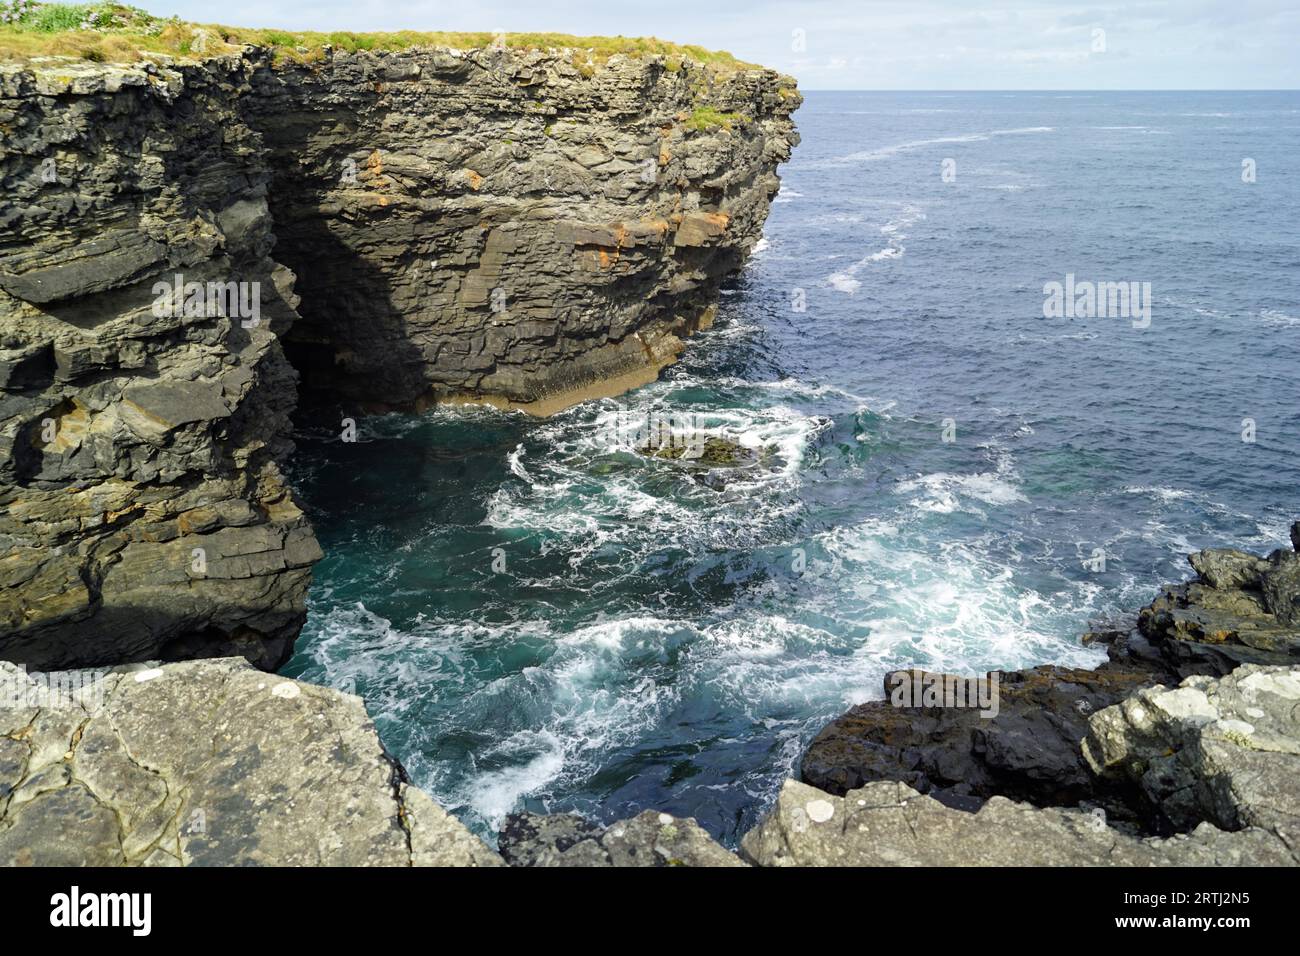 The Kilkee Cliff walk is a scenic 2 to 3 hour (8km) moderate loop walk along the Kilkee Cliffs starting at the Diamond Rocks Cafe, Pollock Holes car Stock Photo